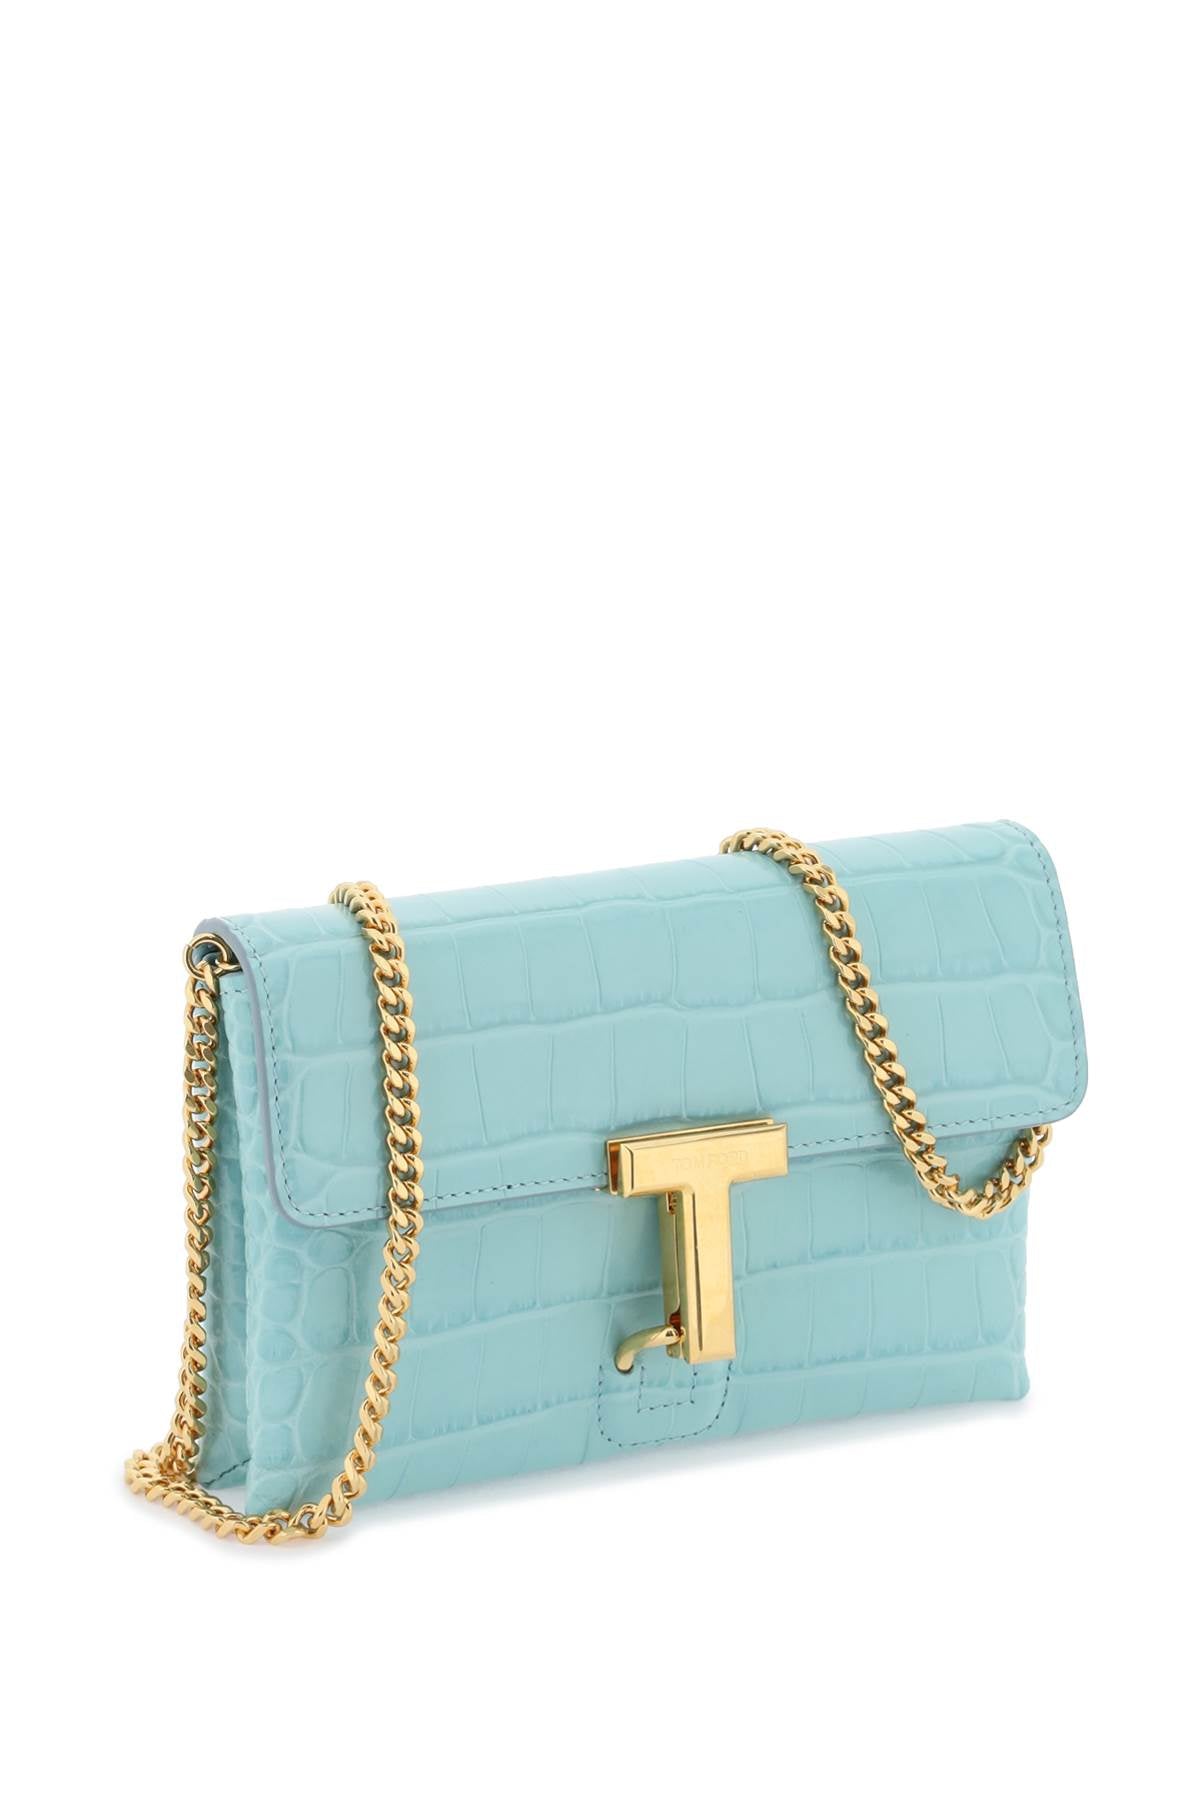 TOM FORD Light Blue Crocodile-Embossed Mini Leather Clutch with Gold-Tone Chain Strap